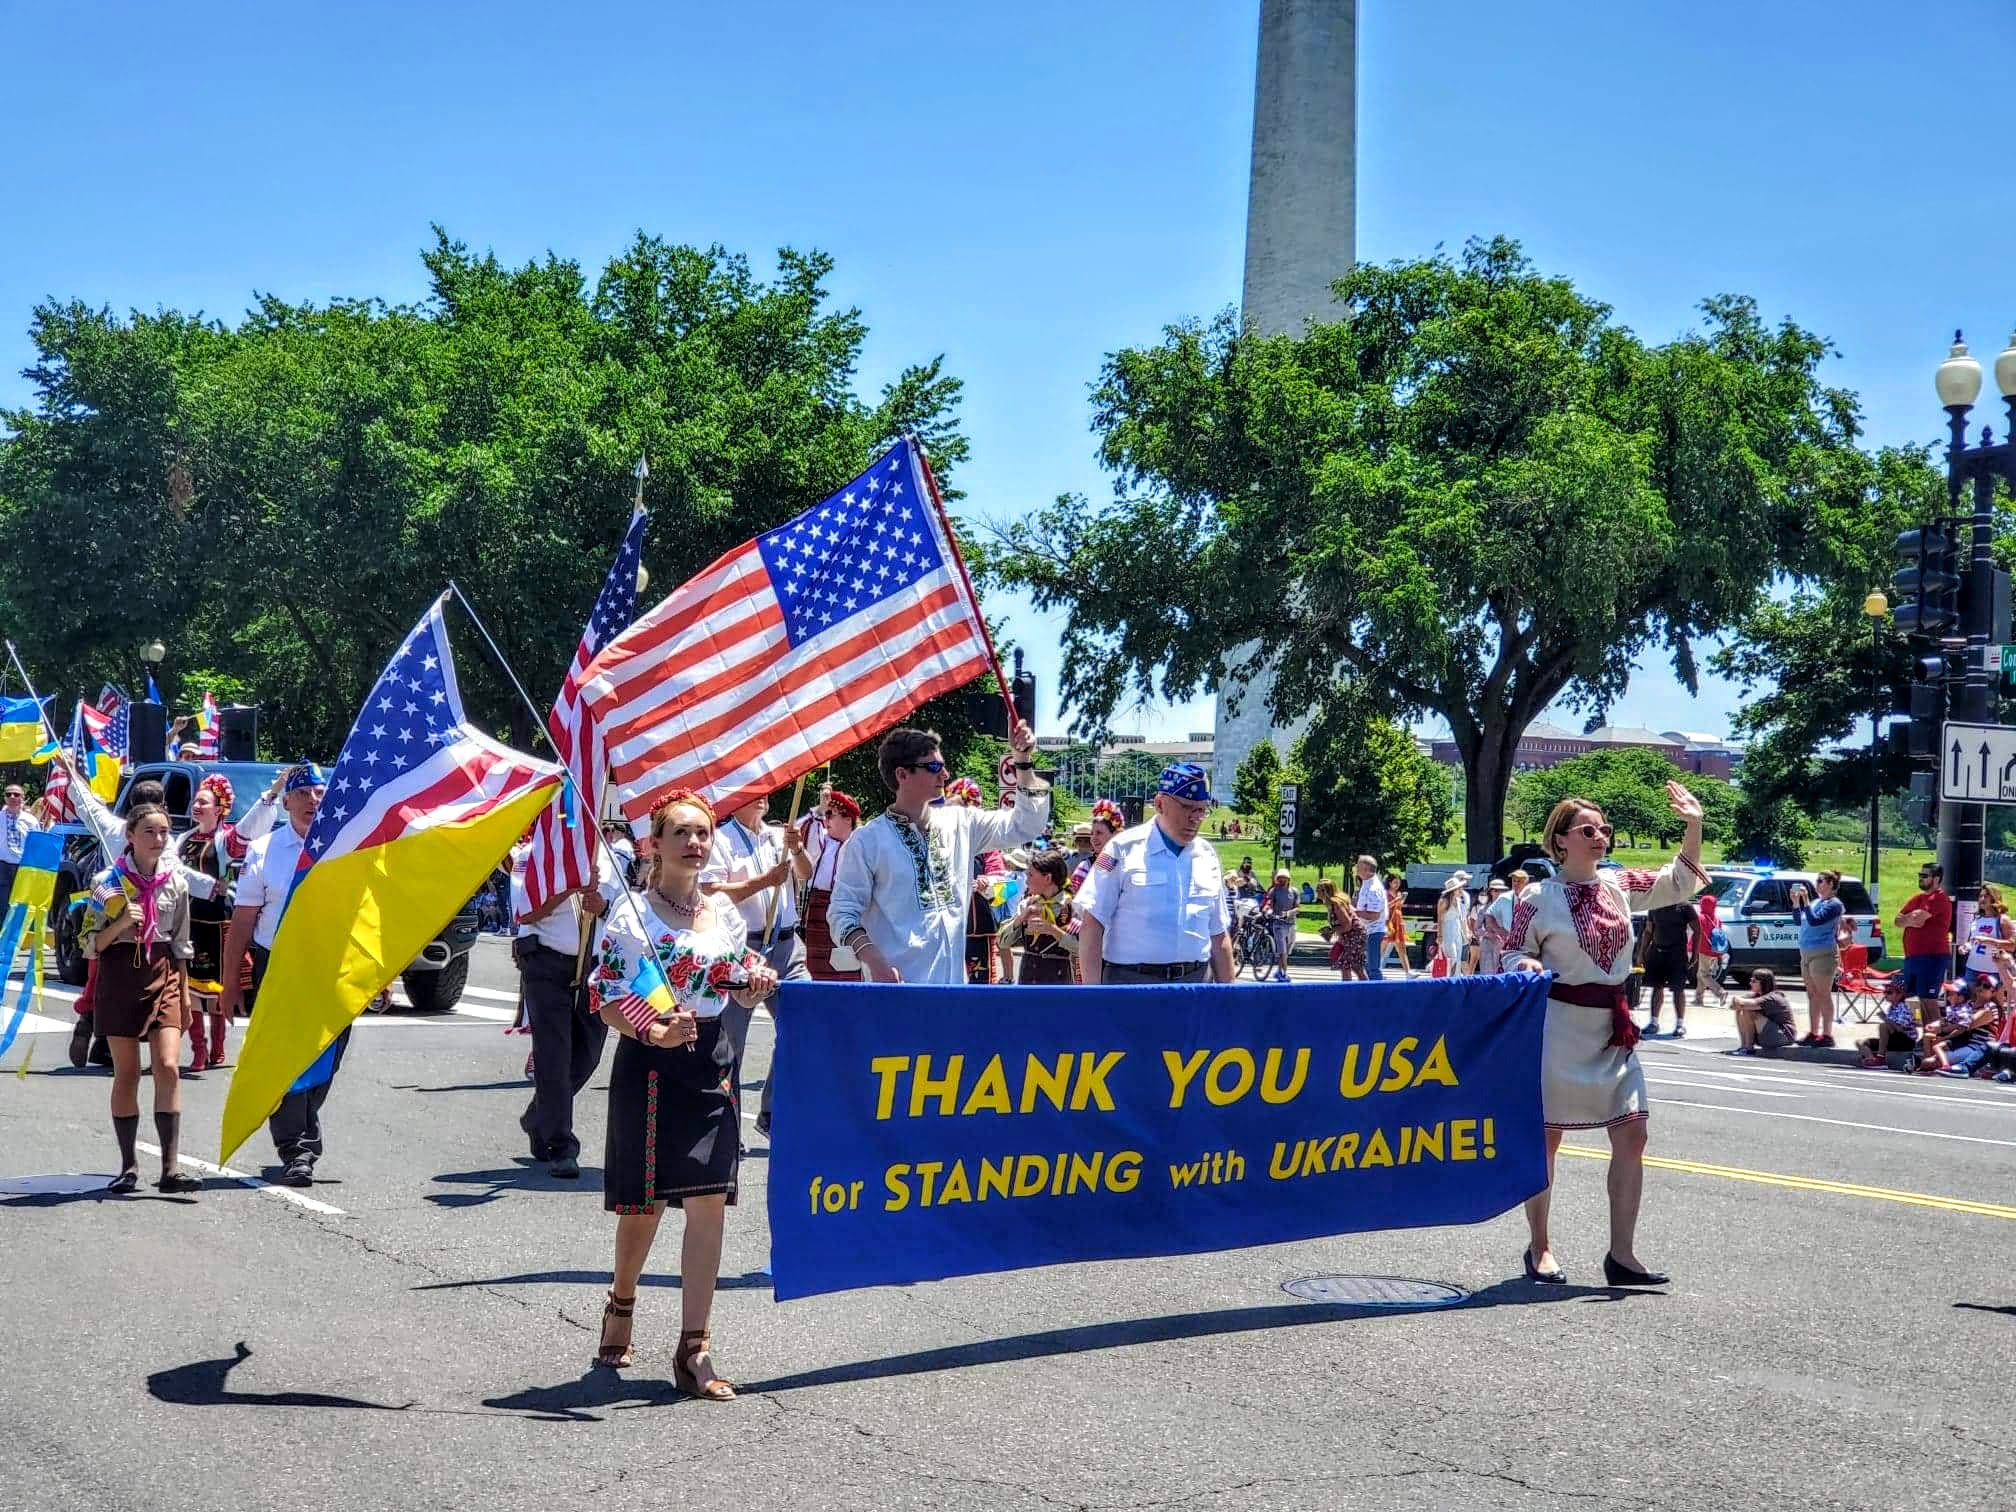 US Ukrainian Activists at the national Fourth of July Independence Day Parade in Washington DC, 2022